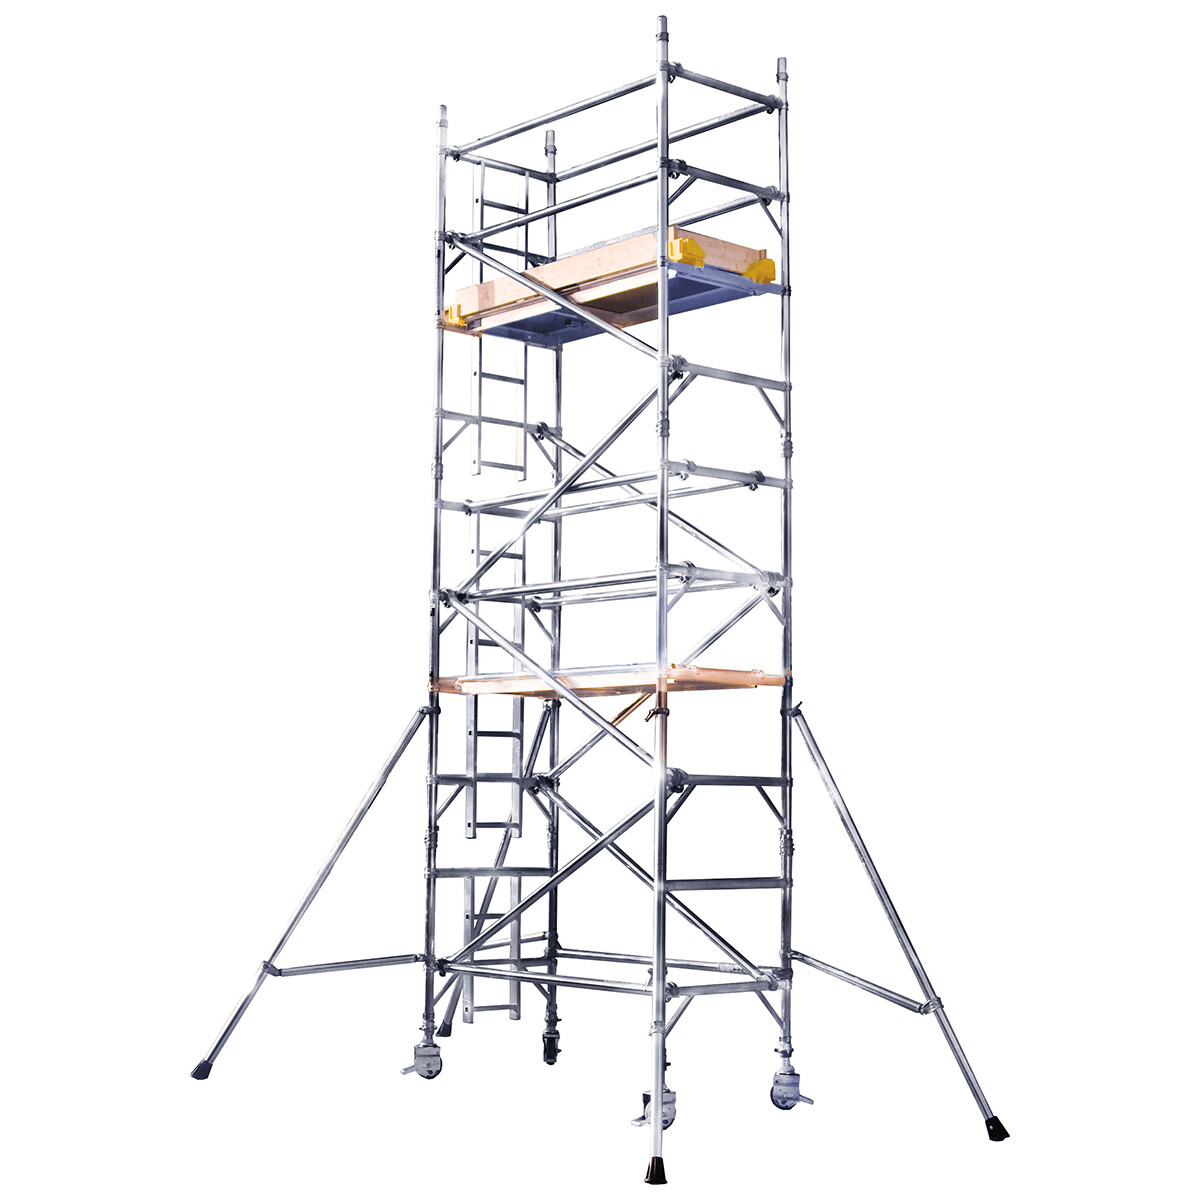 Narrow Span Mobile Tower - 0.85m wide x 6.3m high